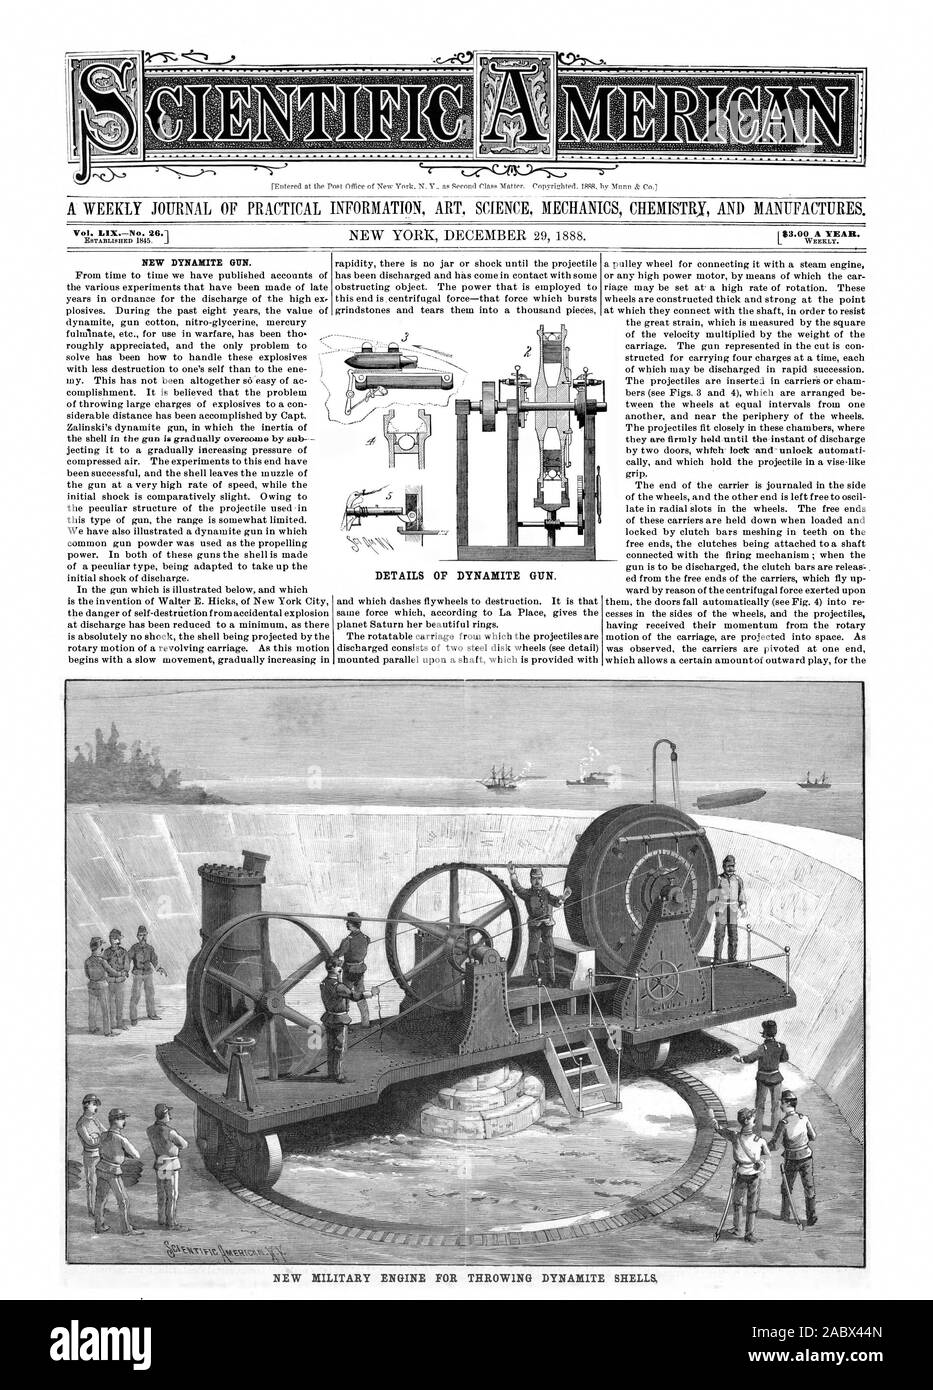 A NEW DYNAMITE GUN. DETAILS OF DYNAMITE GUN. NEW MILITARY ENGINE FOR THROWING DYNAMITE SHELLS, scientific american, 1888-12-29 Stock Photo